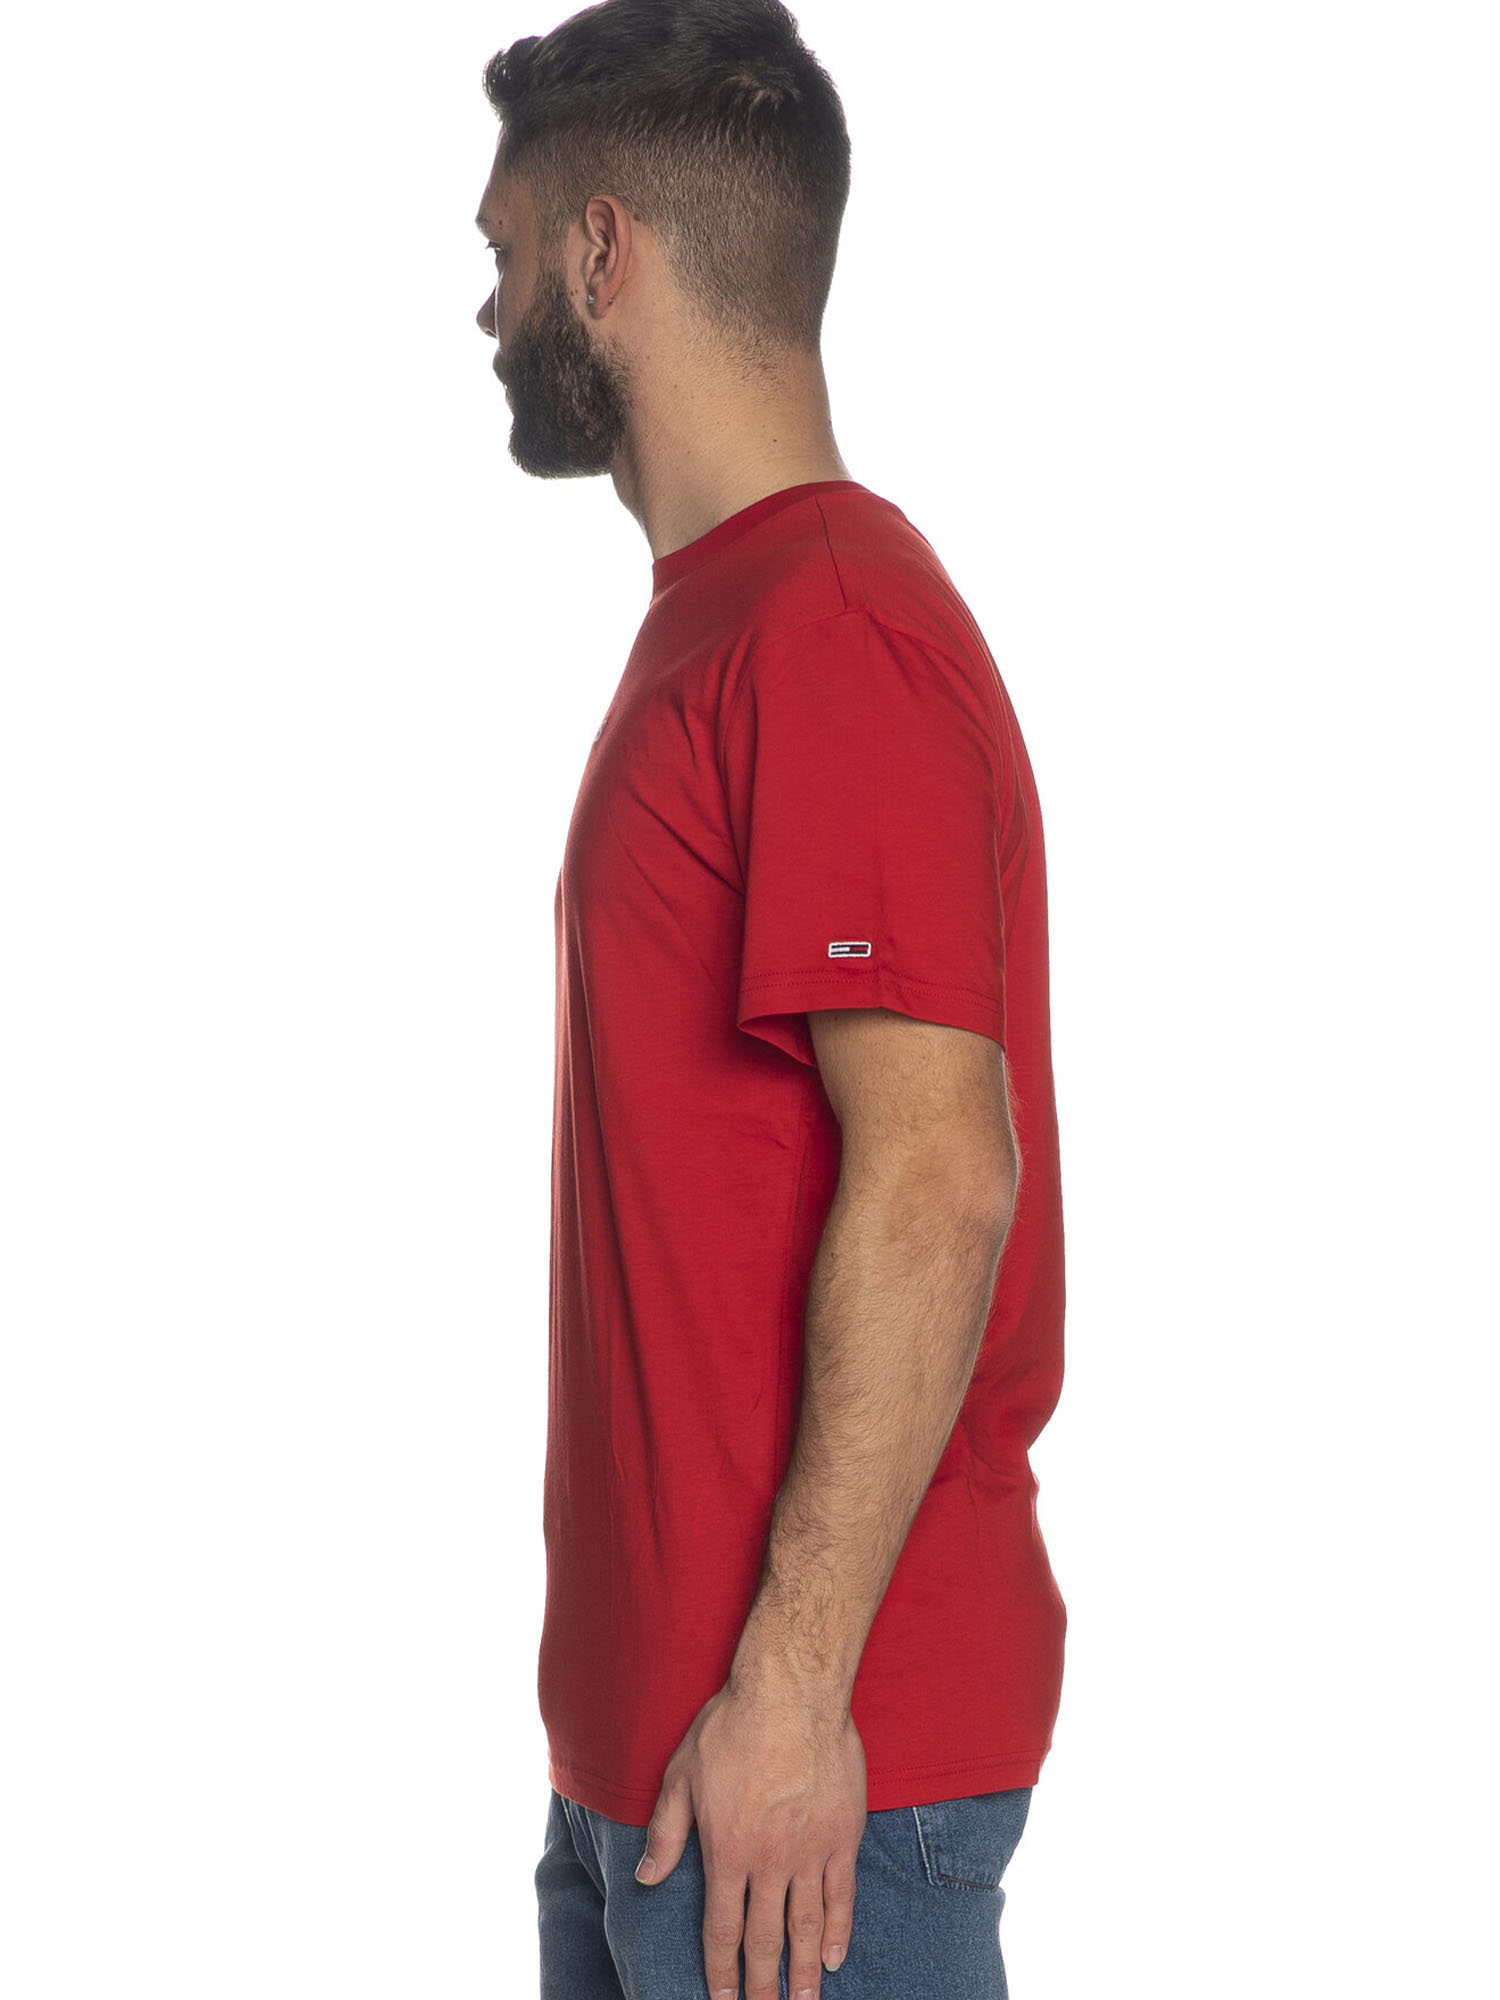 TOMMY H. CLSC LINEAR - ROSSO